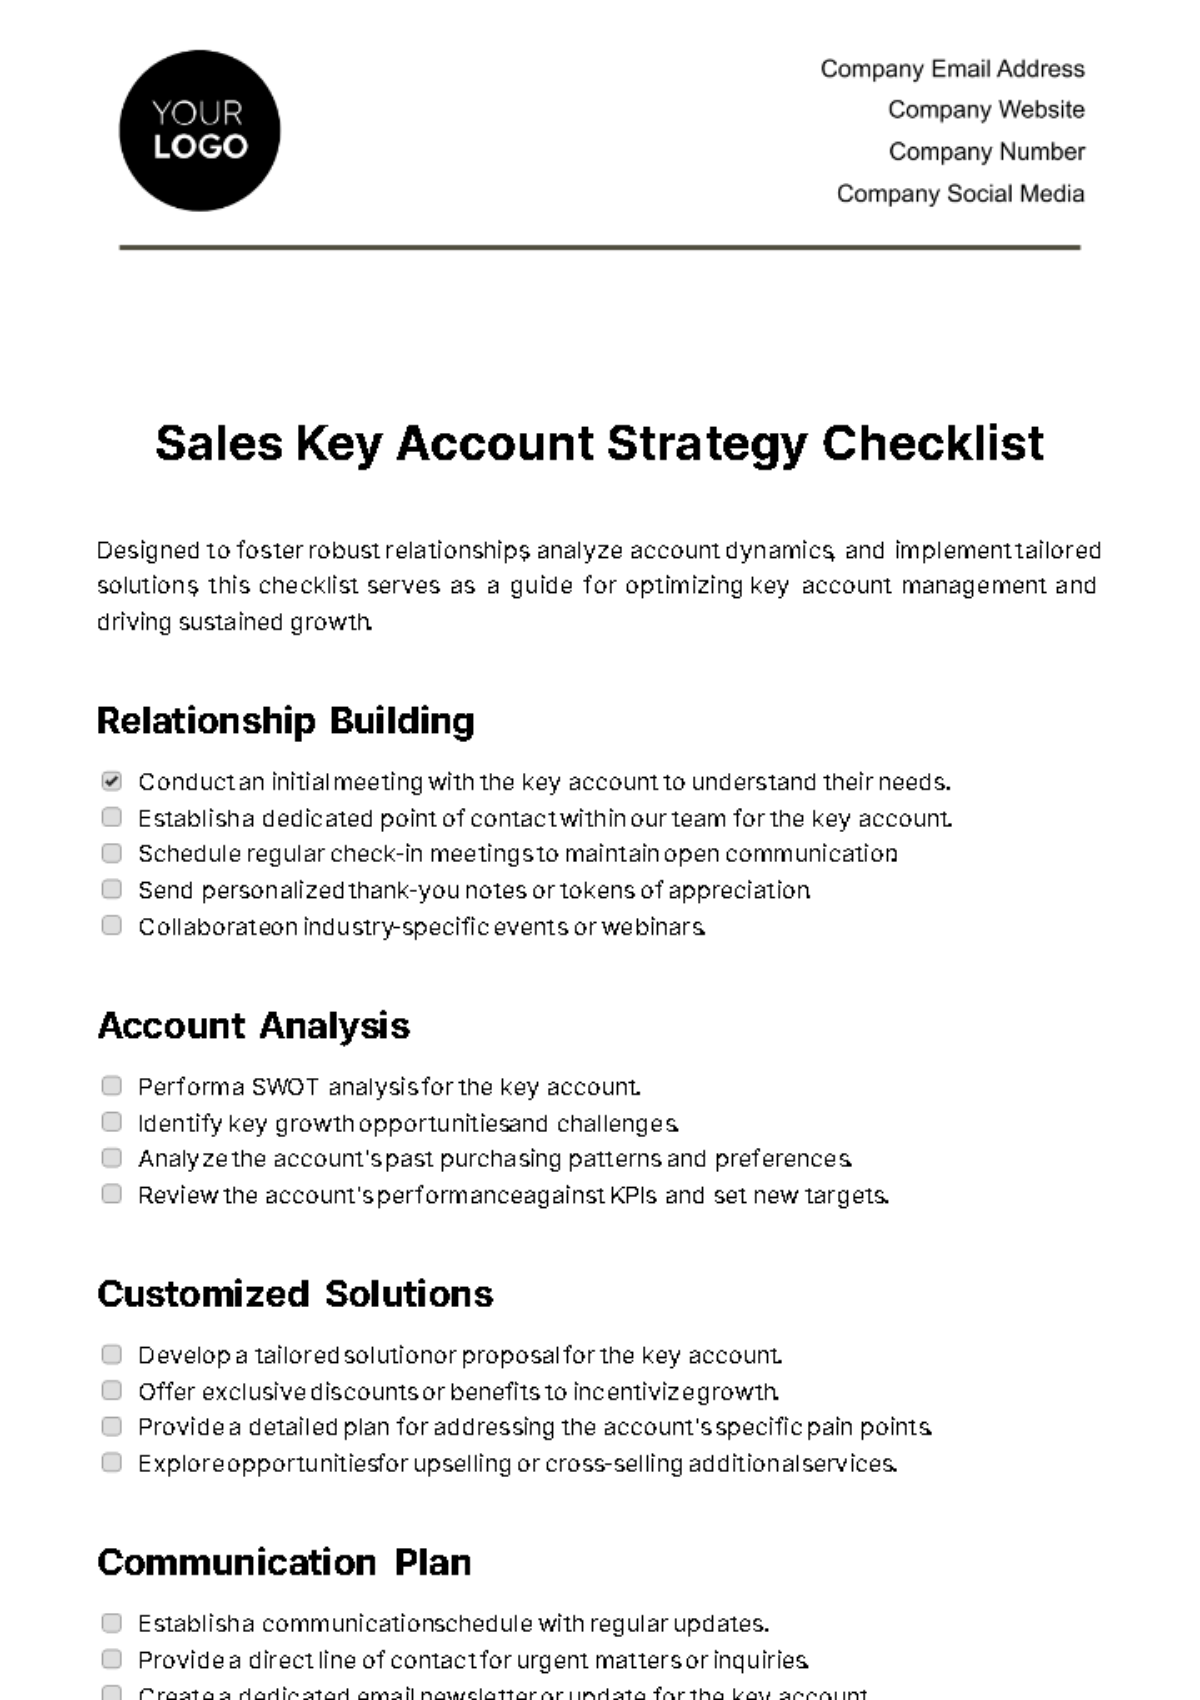 Free Sales Key Account Strategy Checklist Template